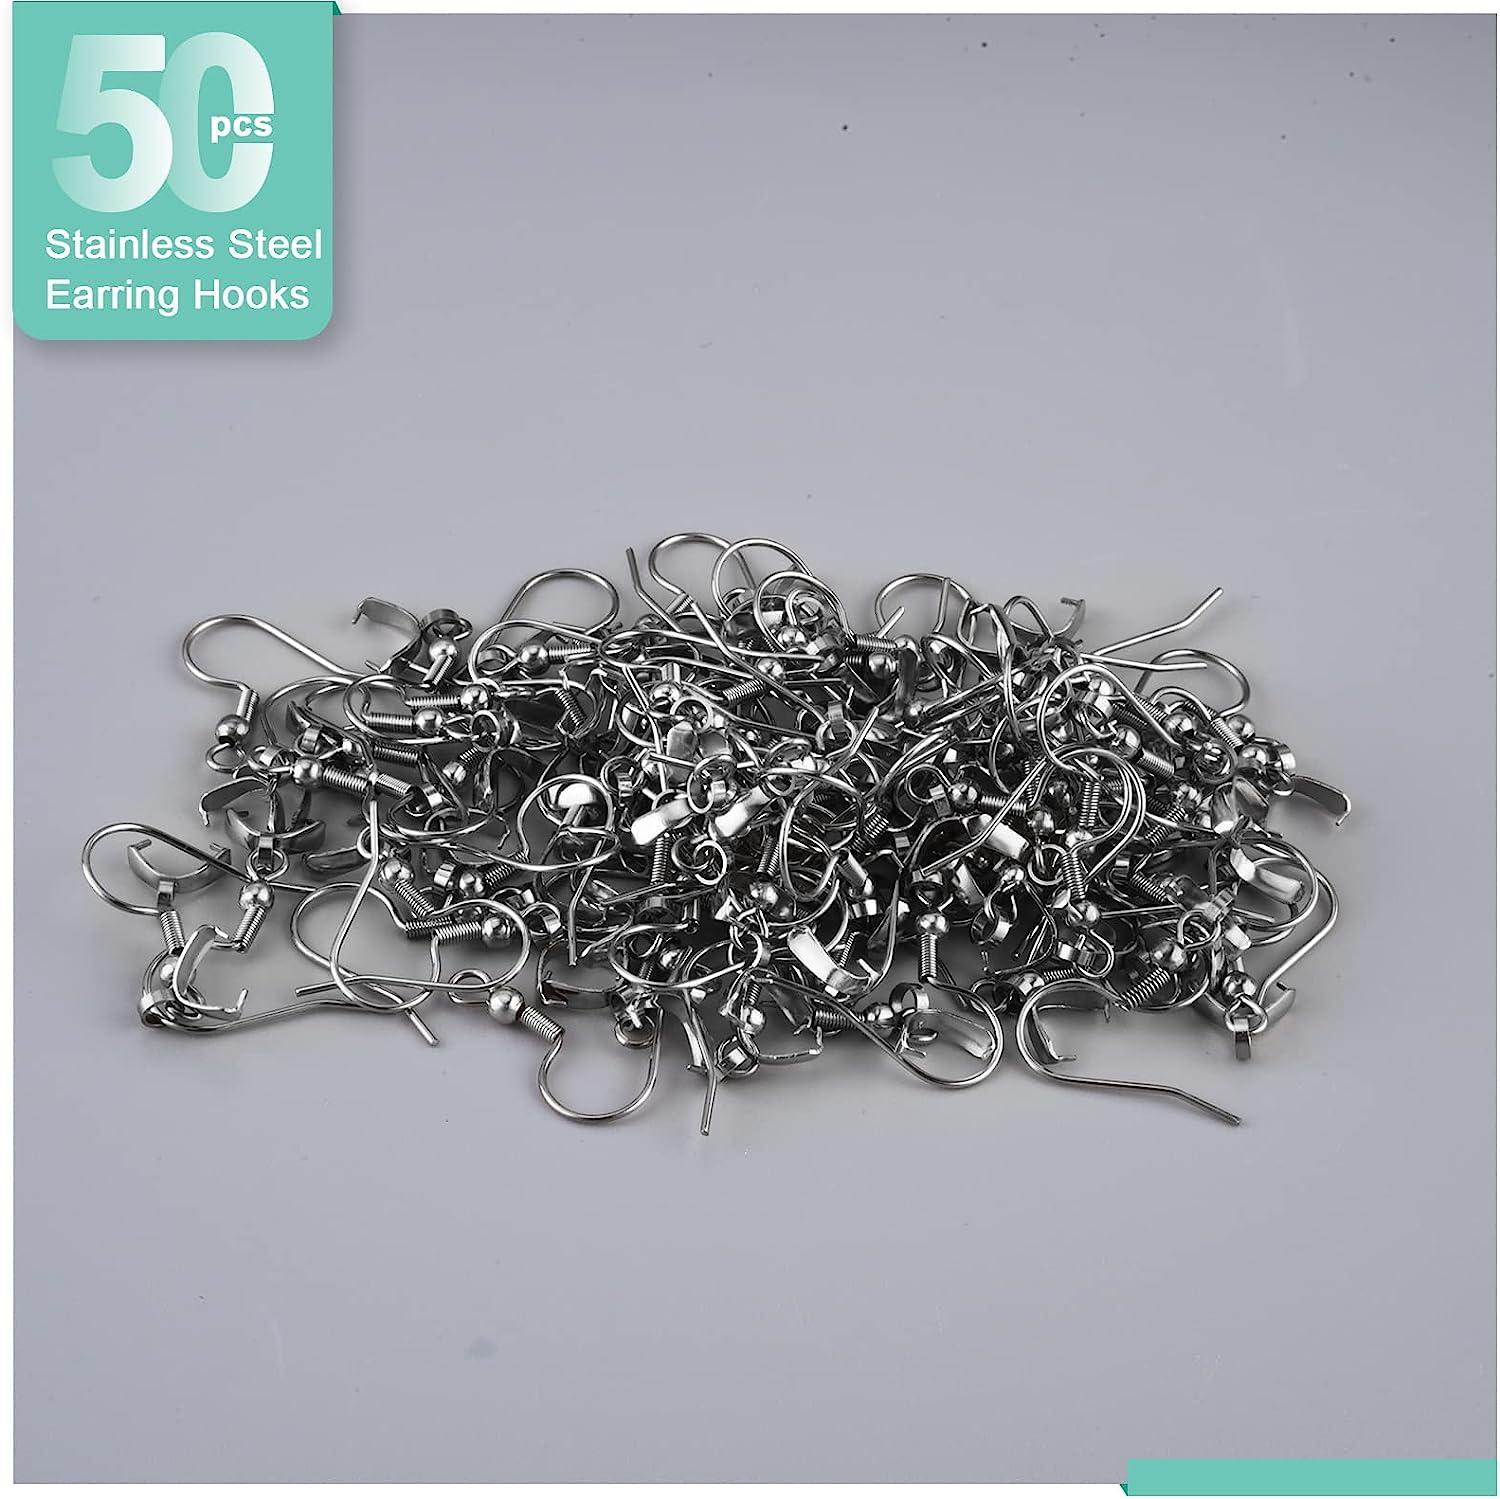 Buy 50Pcs/25Pairs Silver Earring Hooks for Jewelry Making,Thick